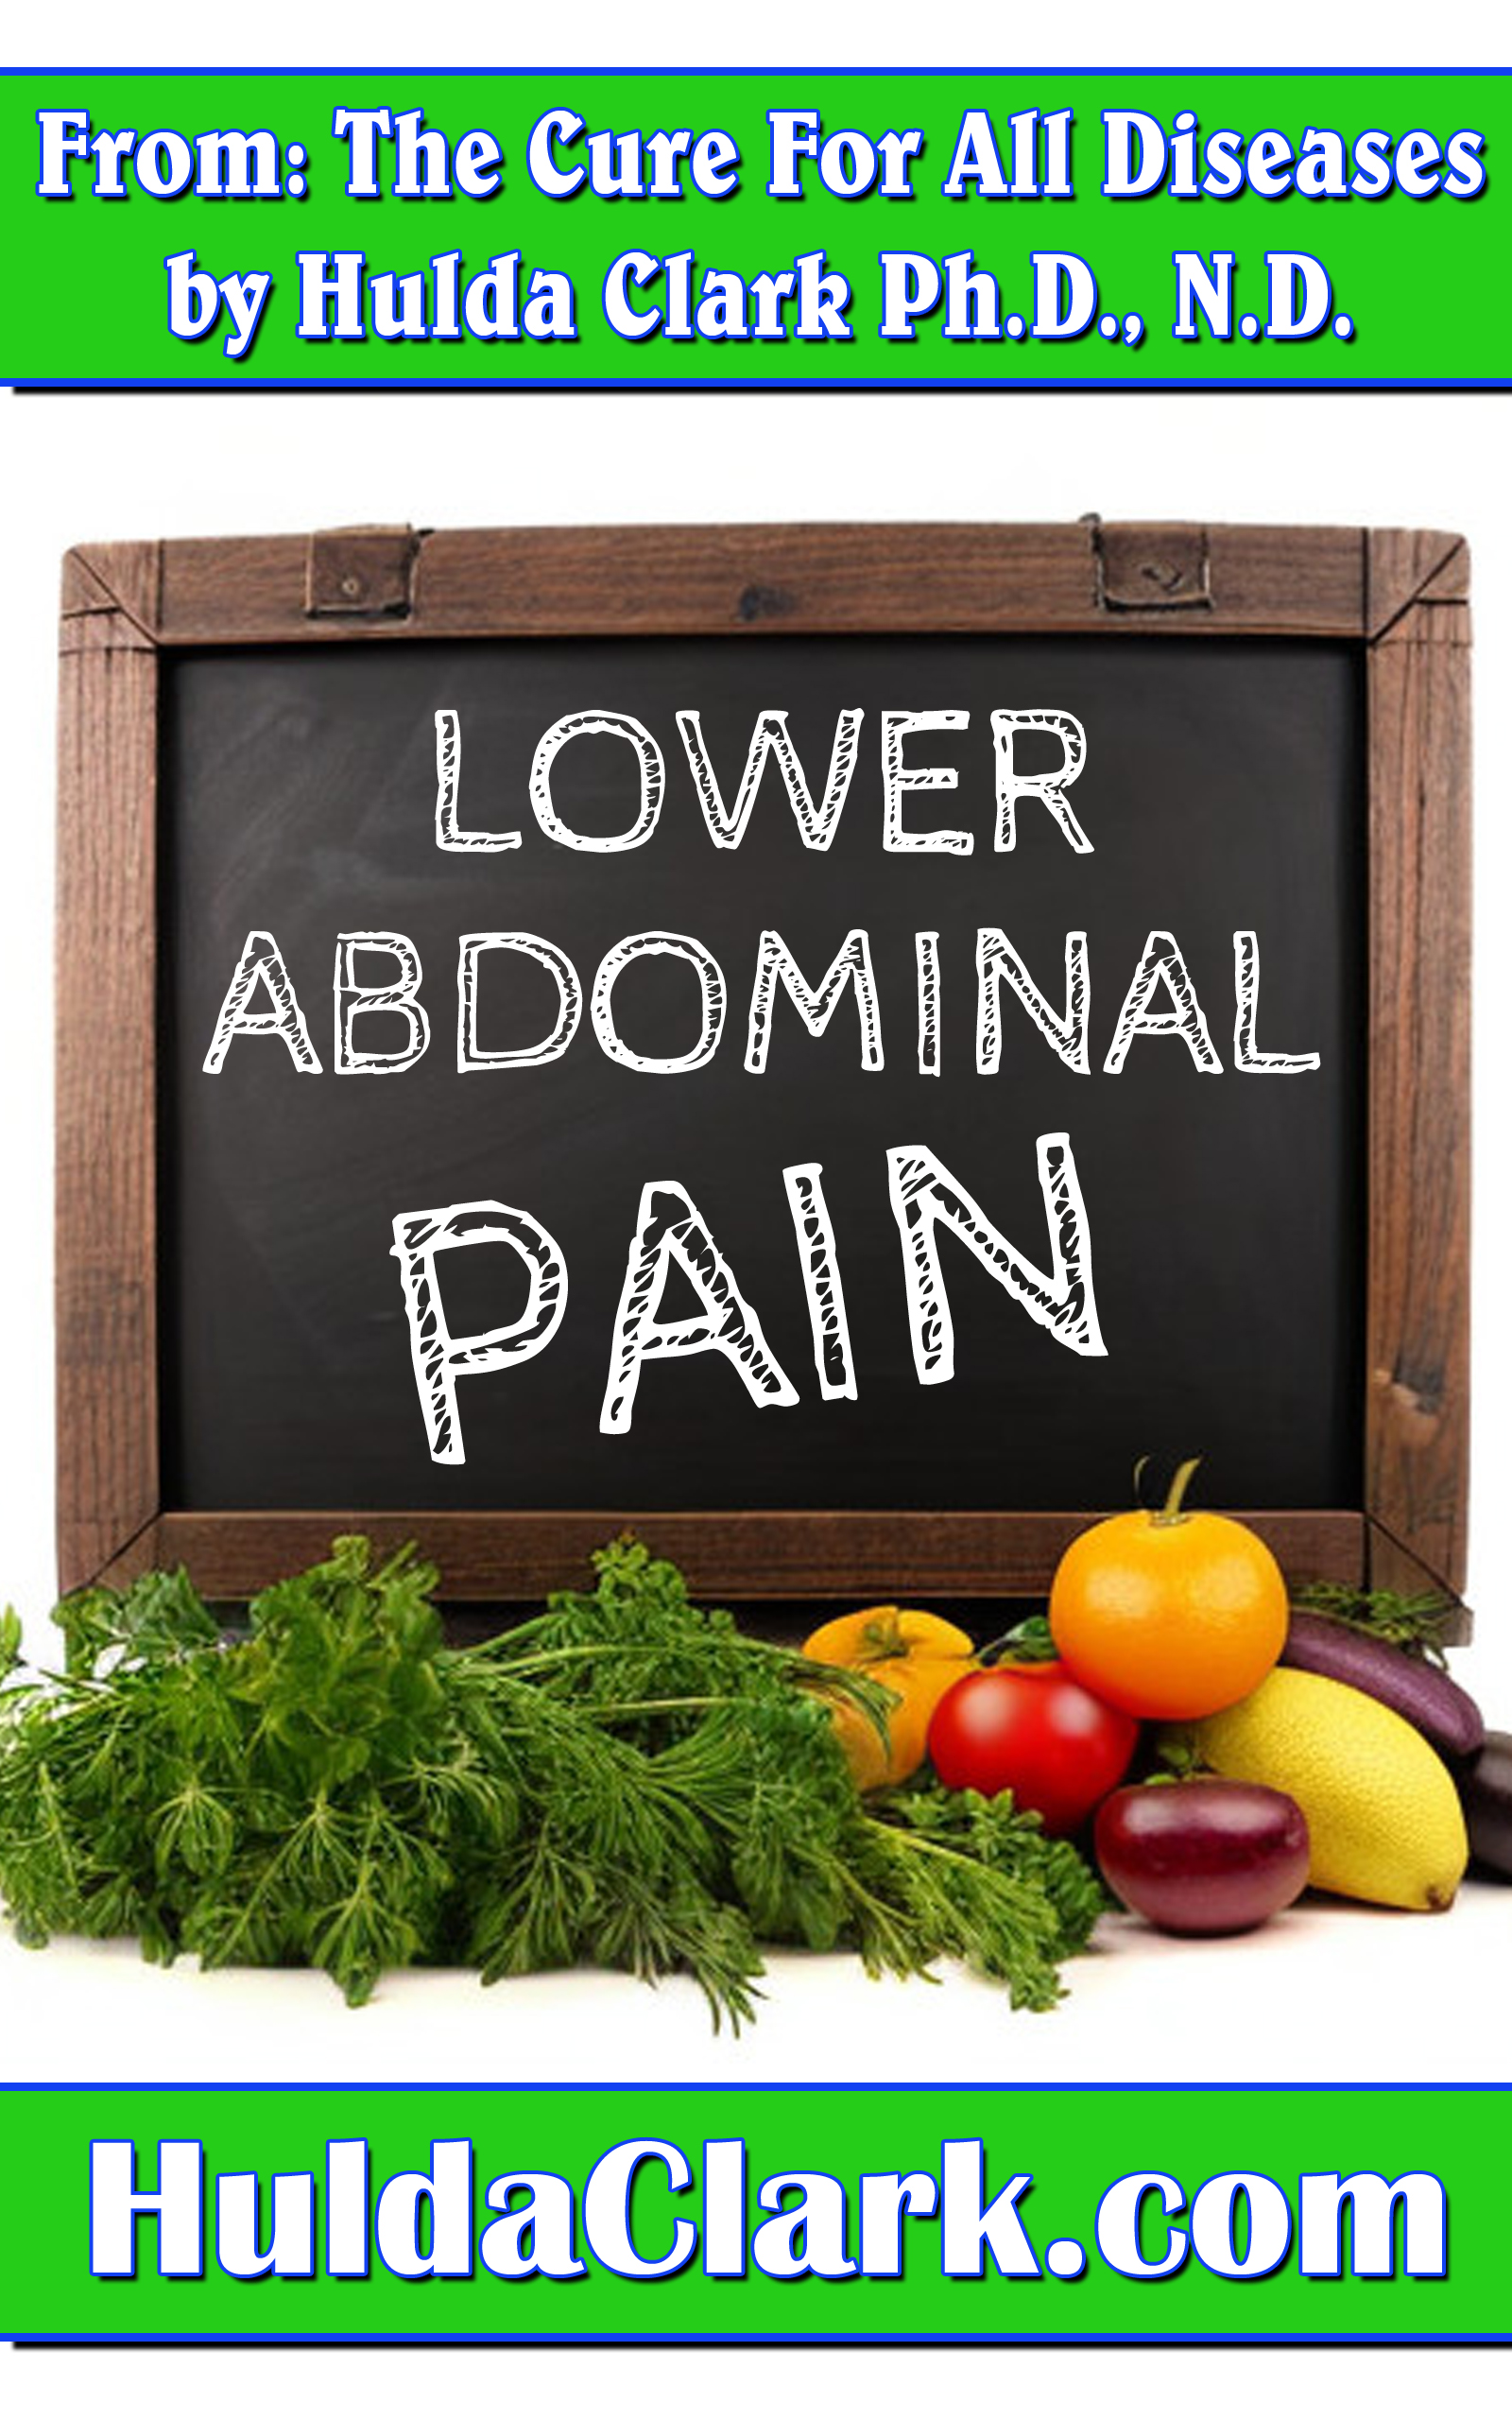 Lower Abdominal Pain Ebook excerpt from The Cure for All Diseases by Hulda Clark